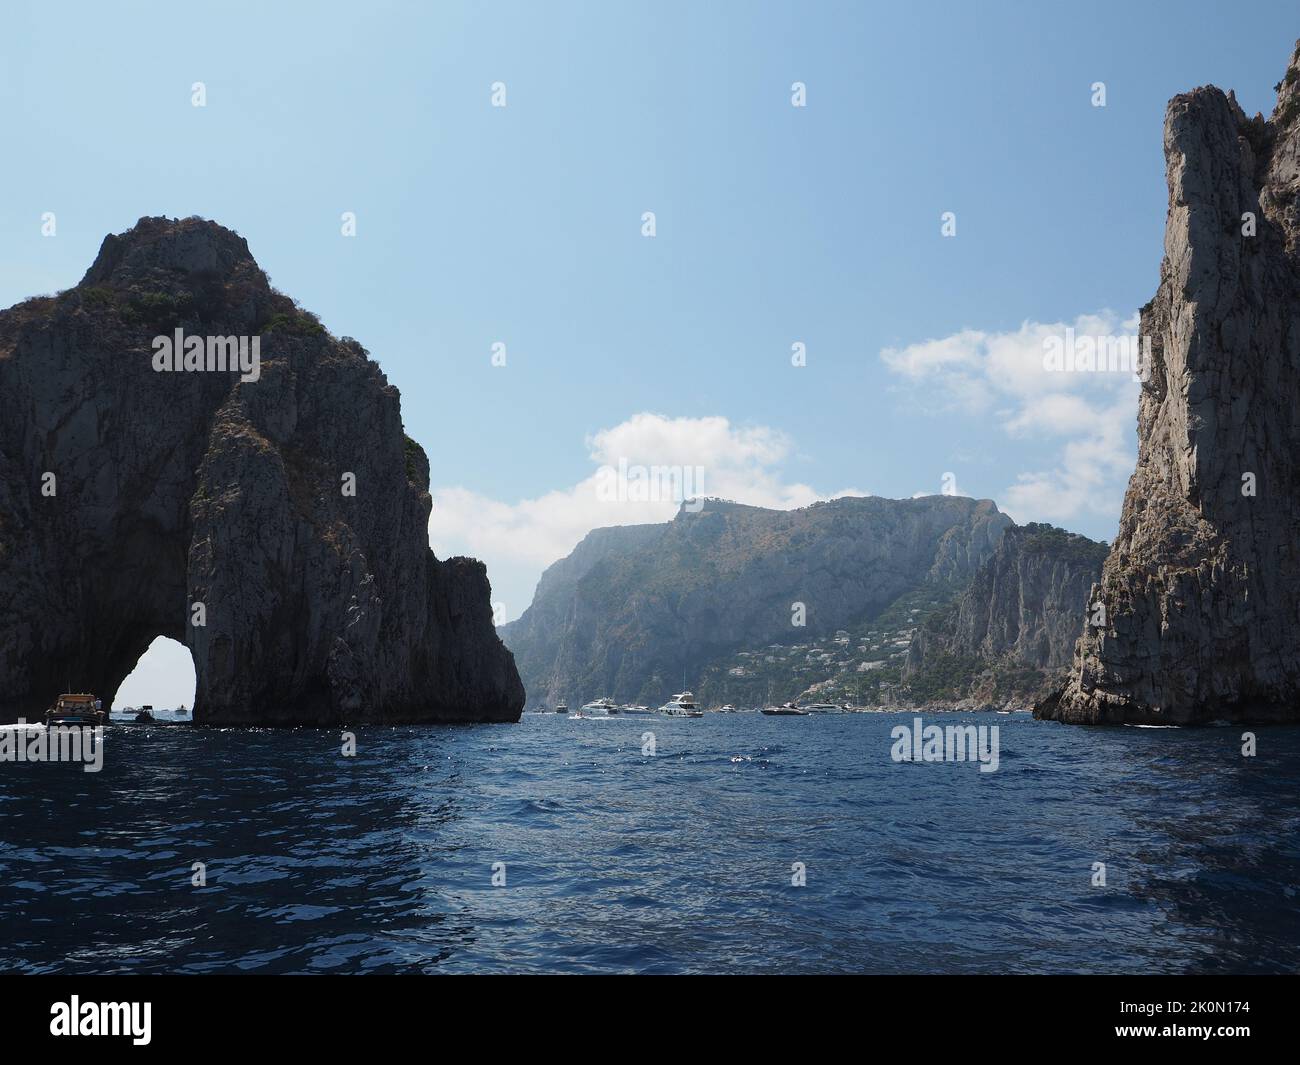 The coast of Capri island is very rocky and steep. These are the iconic Faraglioni rocks, symbols of the island. Tourist boats pass through the arch. Stock Photo